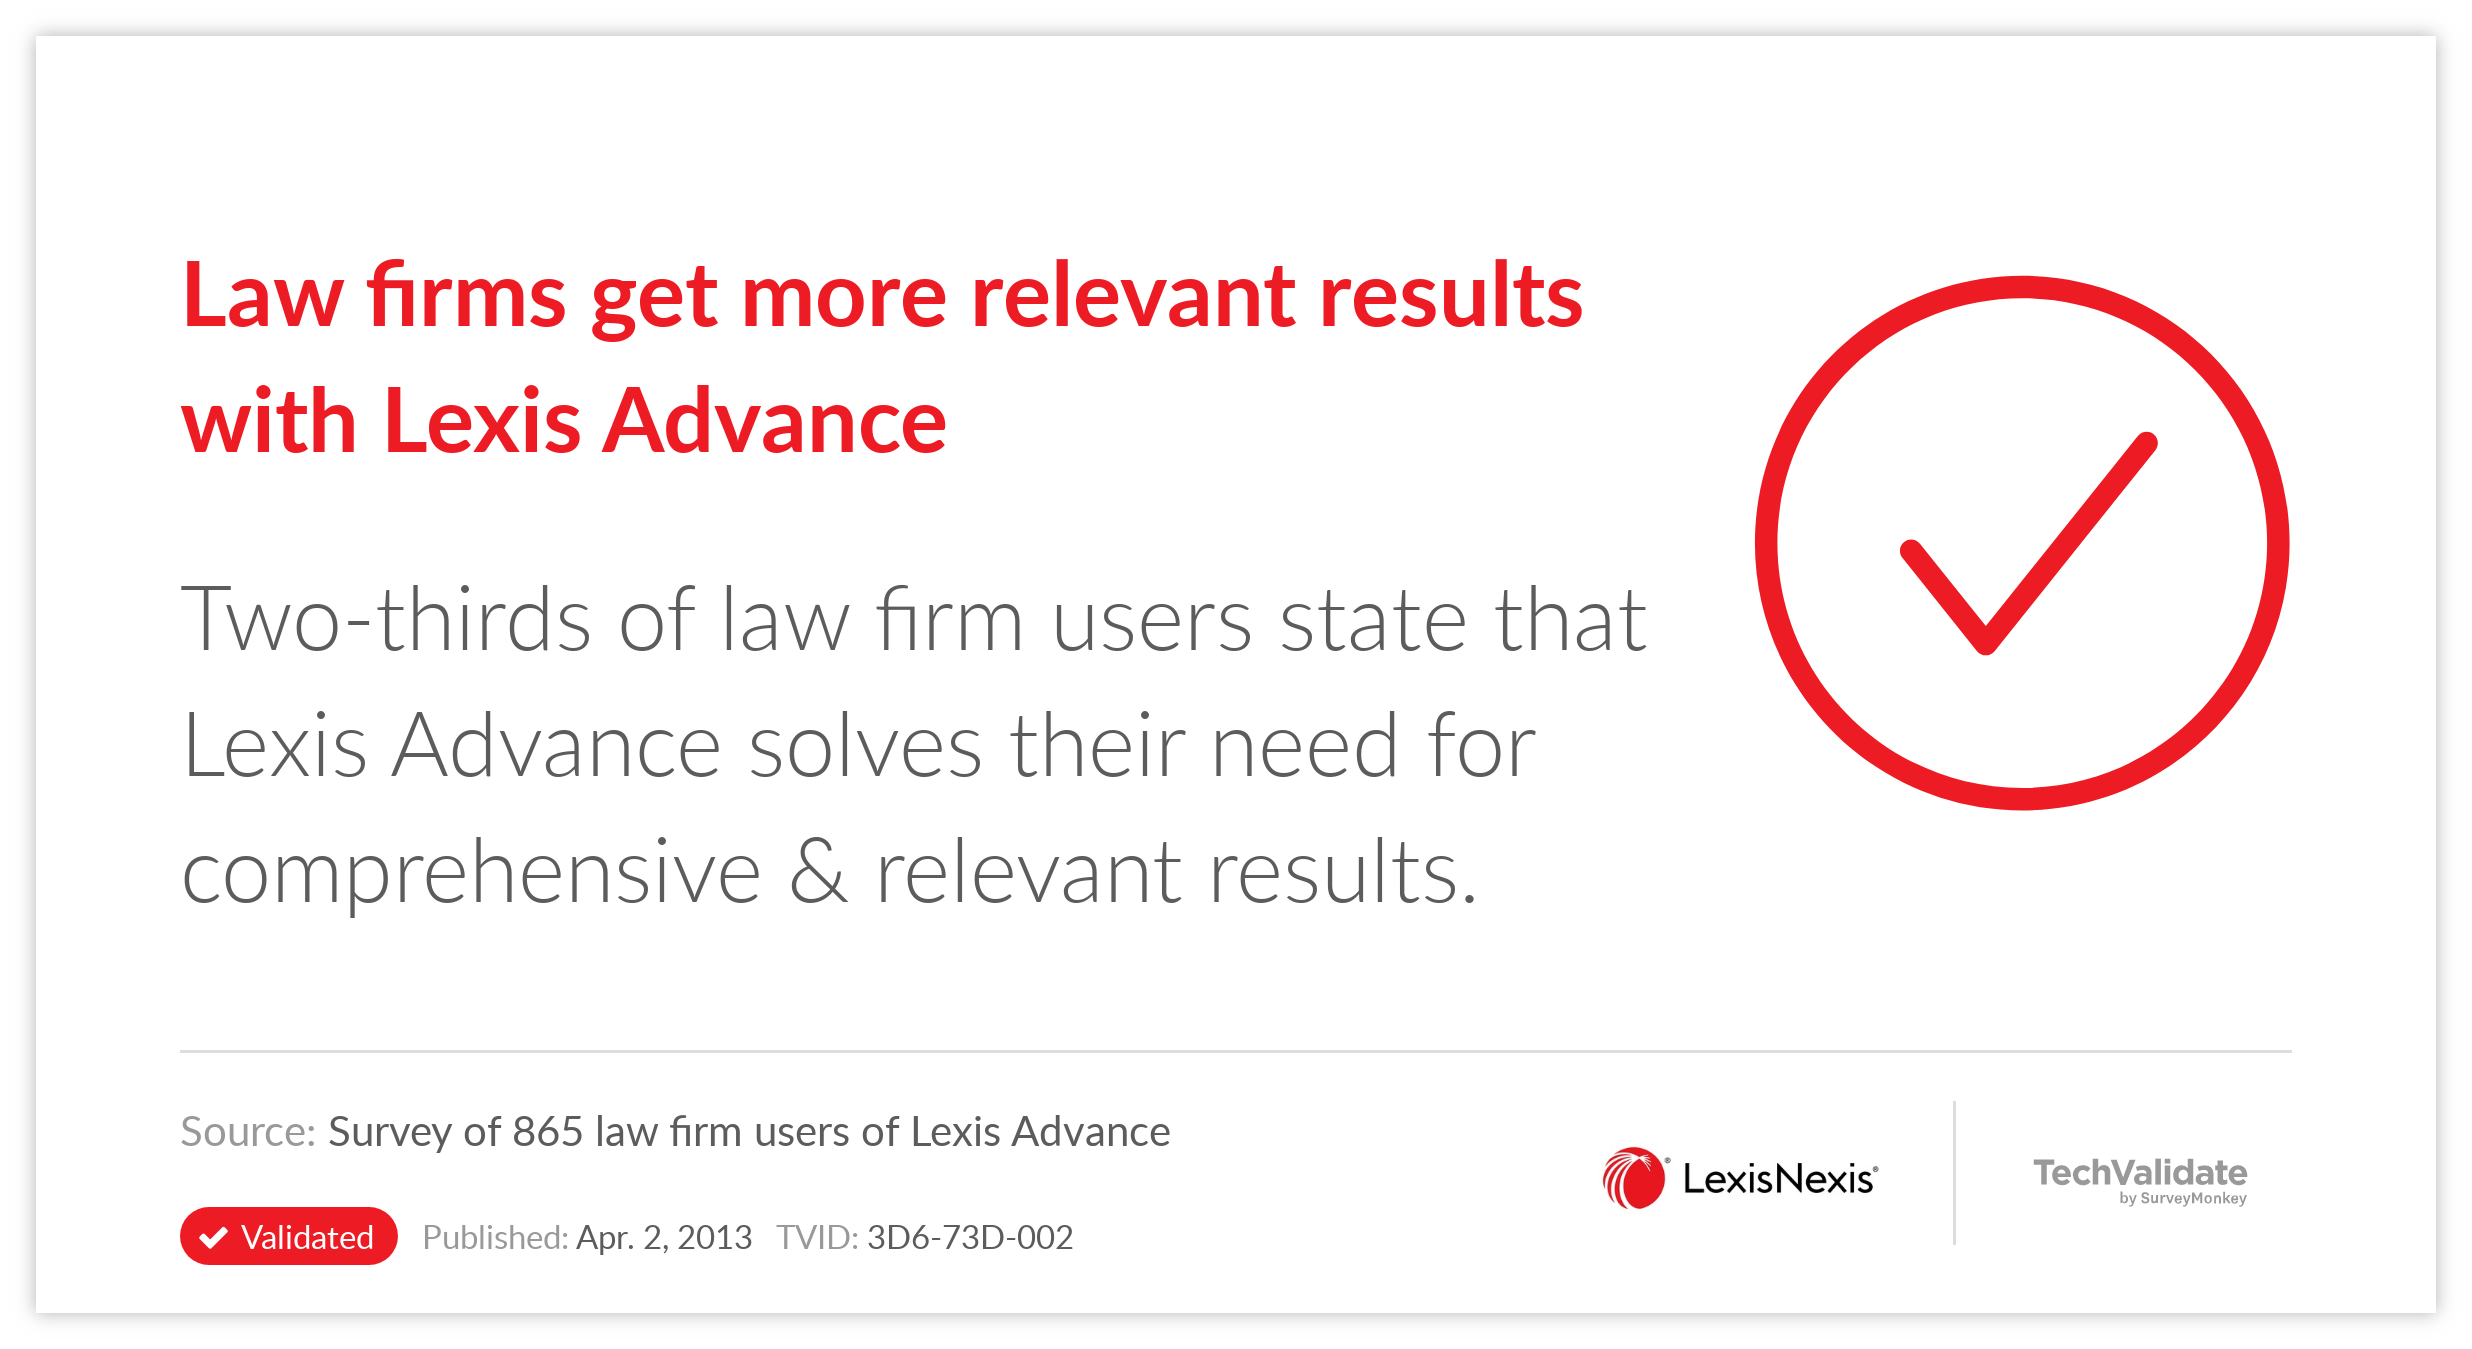 Law firms get more relevant results with Lexis Advance